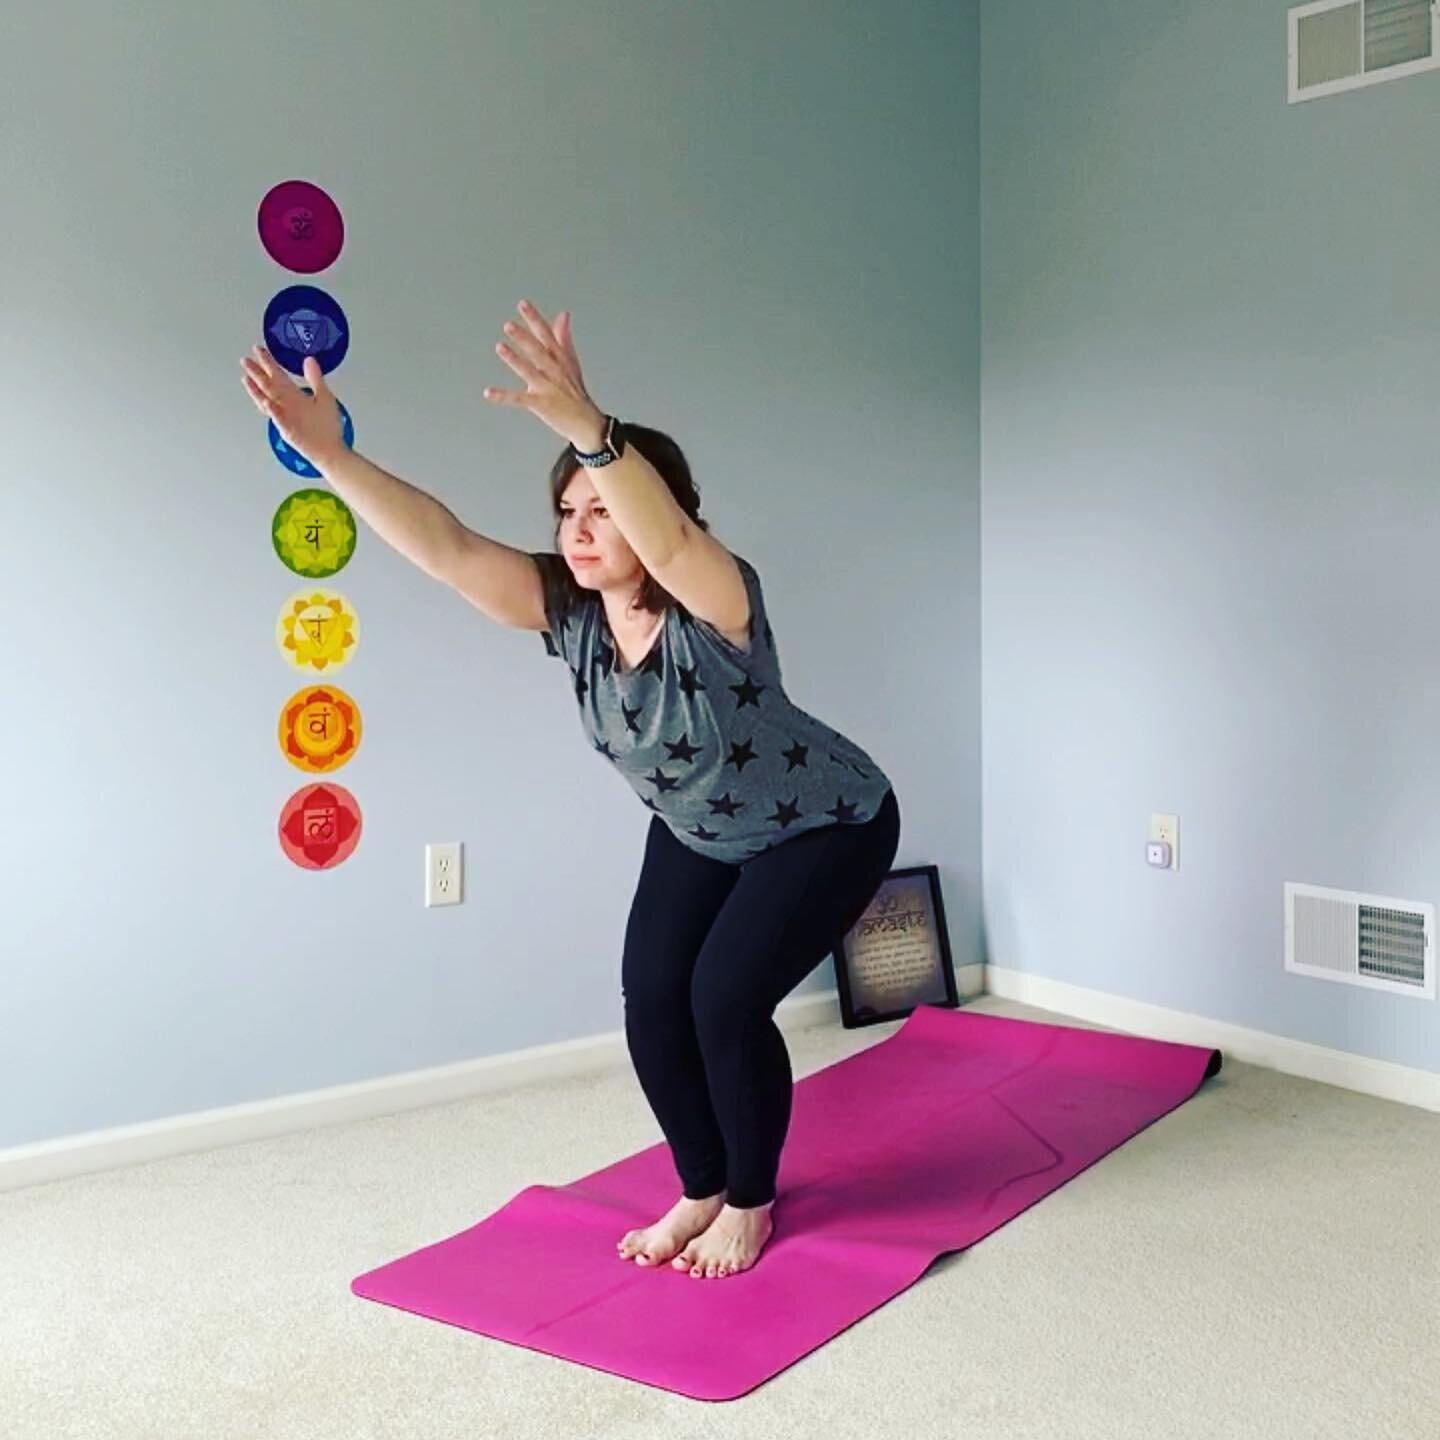 Quick strength circuit and yoga sequence
.
I was writing yoga sequences last night when I came across this quick strength circuit and yoga sequence. I actually have 3 more of these workouts that I never got around to sharing.
.
I love working out and